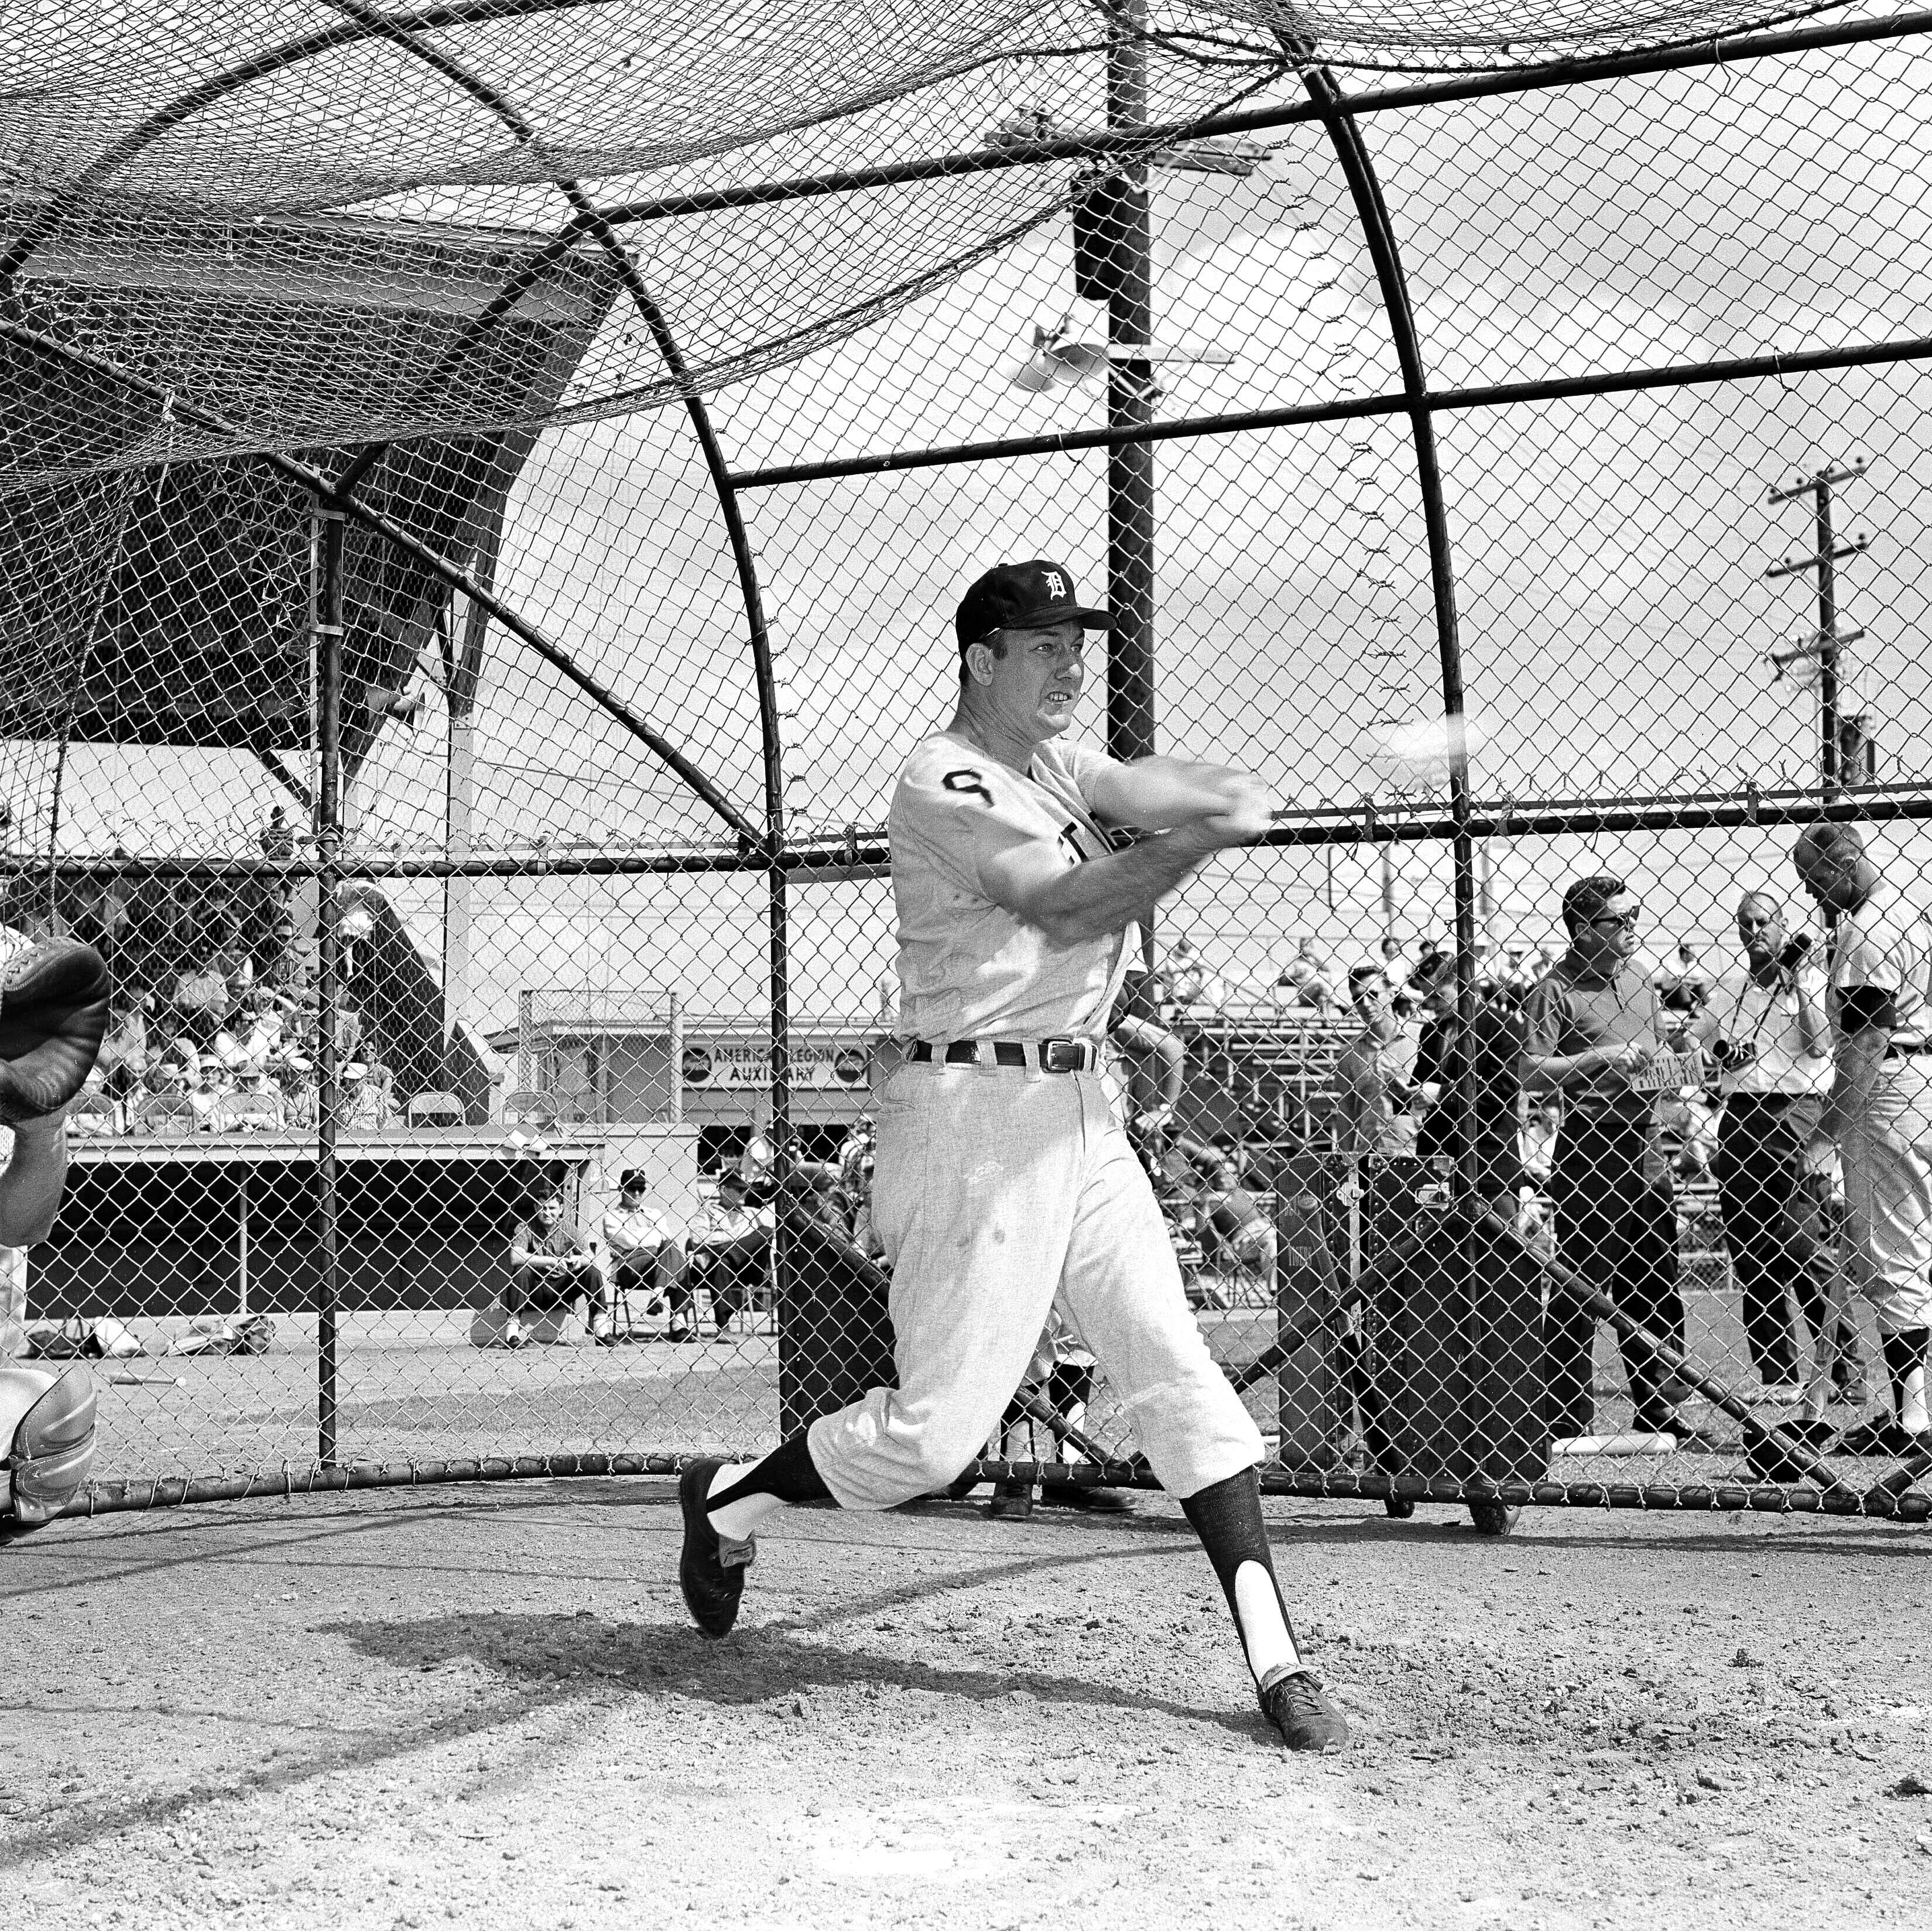 The bat and ball are only a blur as Detroit Tigers outfielder Al Kaline takes his turn during hitting practice at spring training in Lakeland, Fla., March 5, 1963. Kaline says he feels no effects from his shoulder that he broke last year, keeping him out of over sixty ball games. He hit 29 home runs in the 100 games that he played.